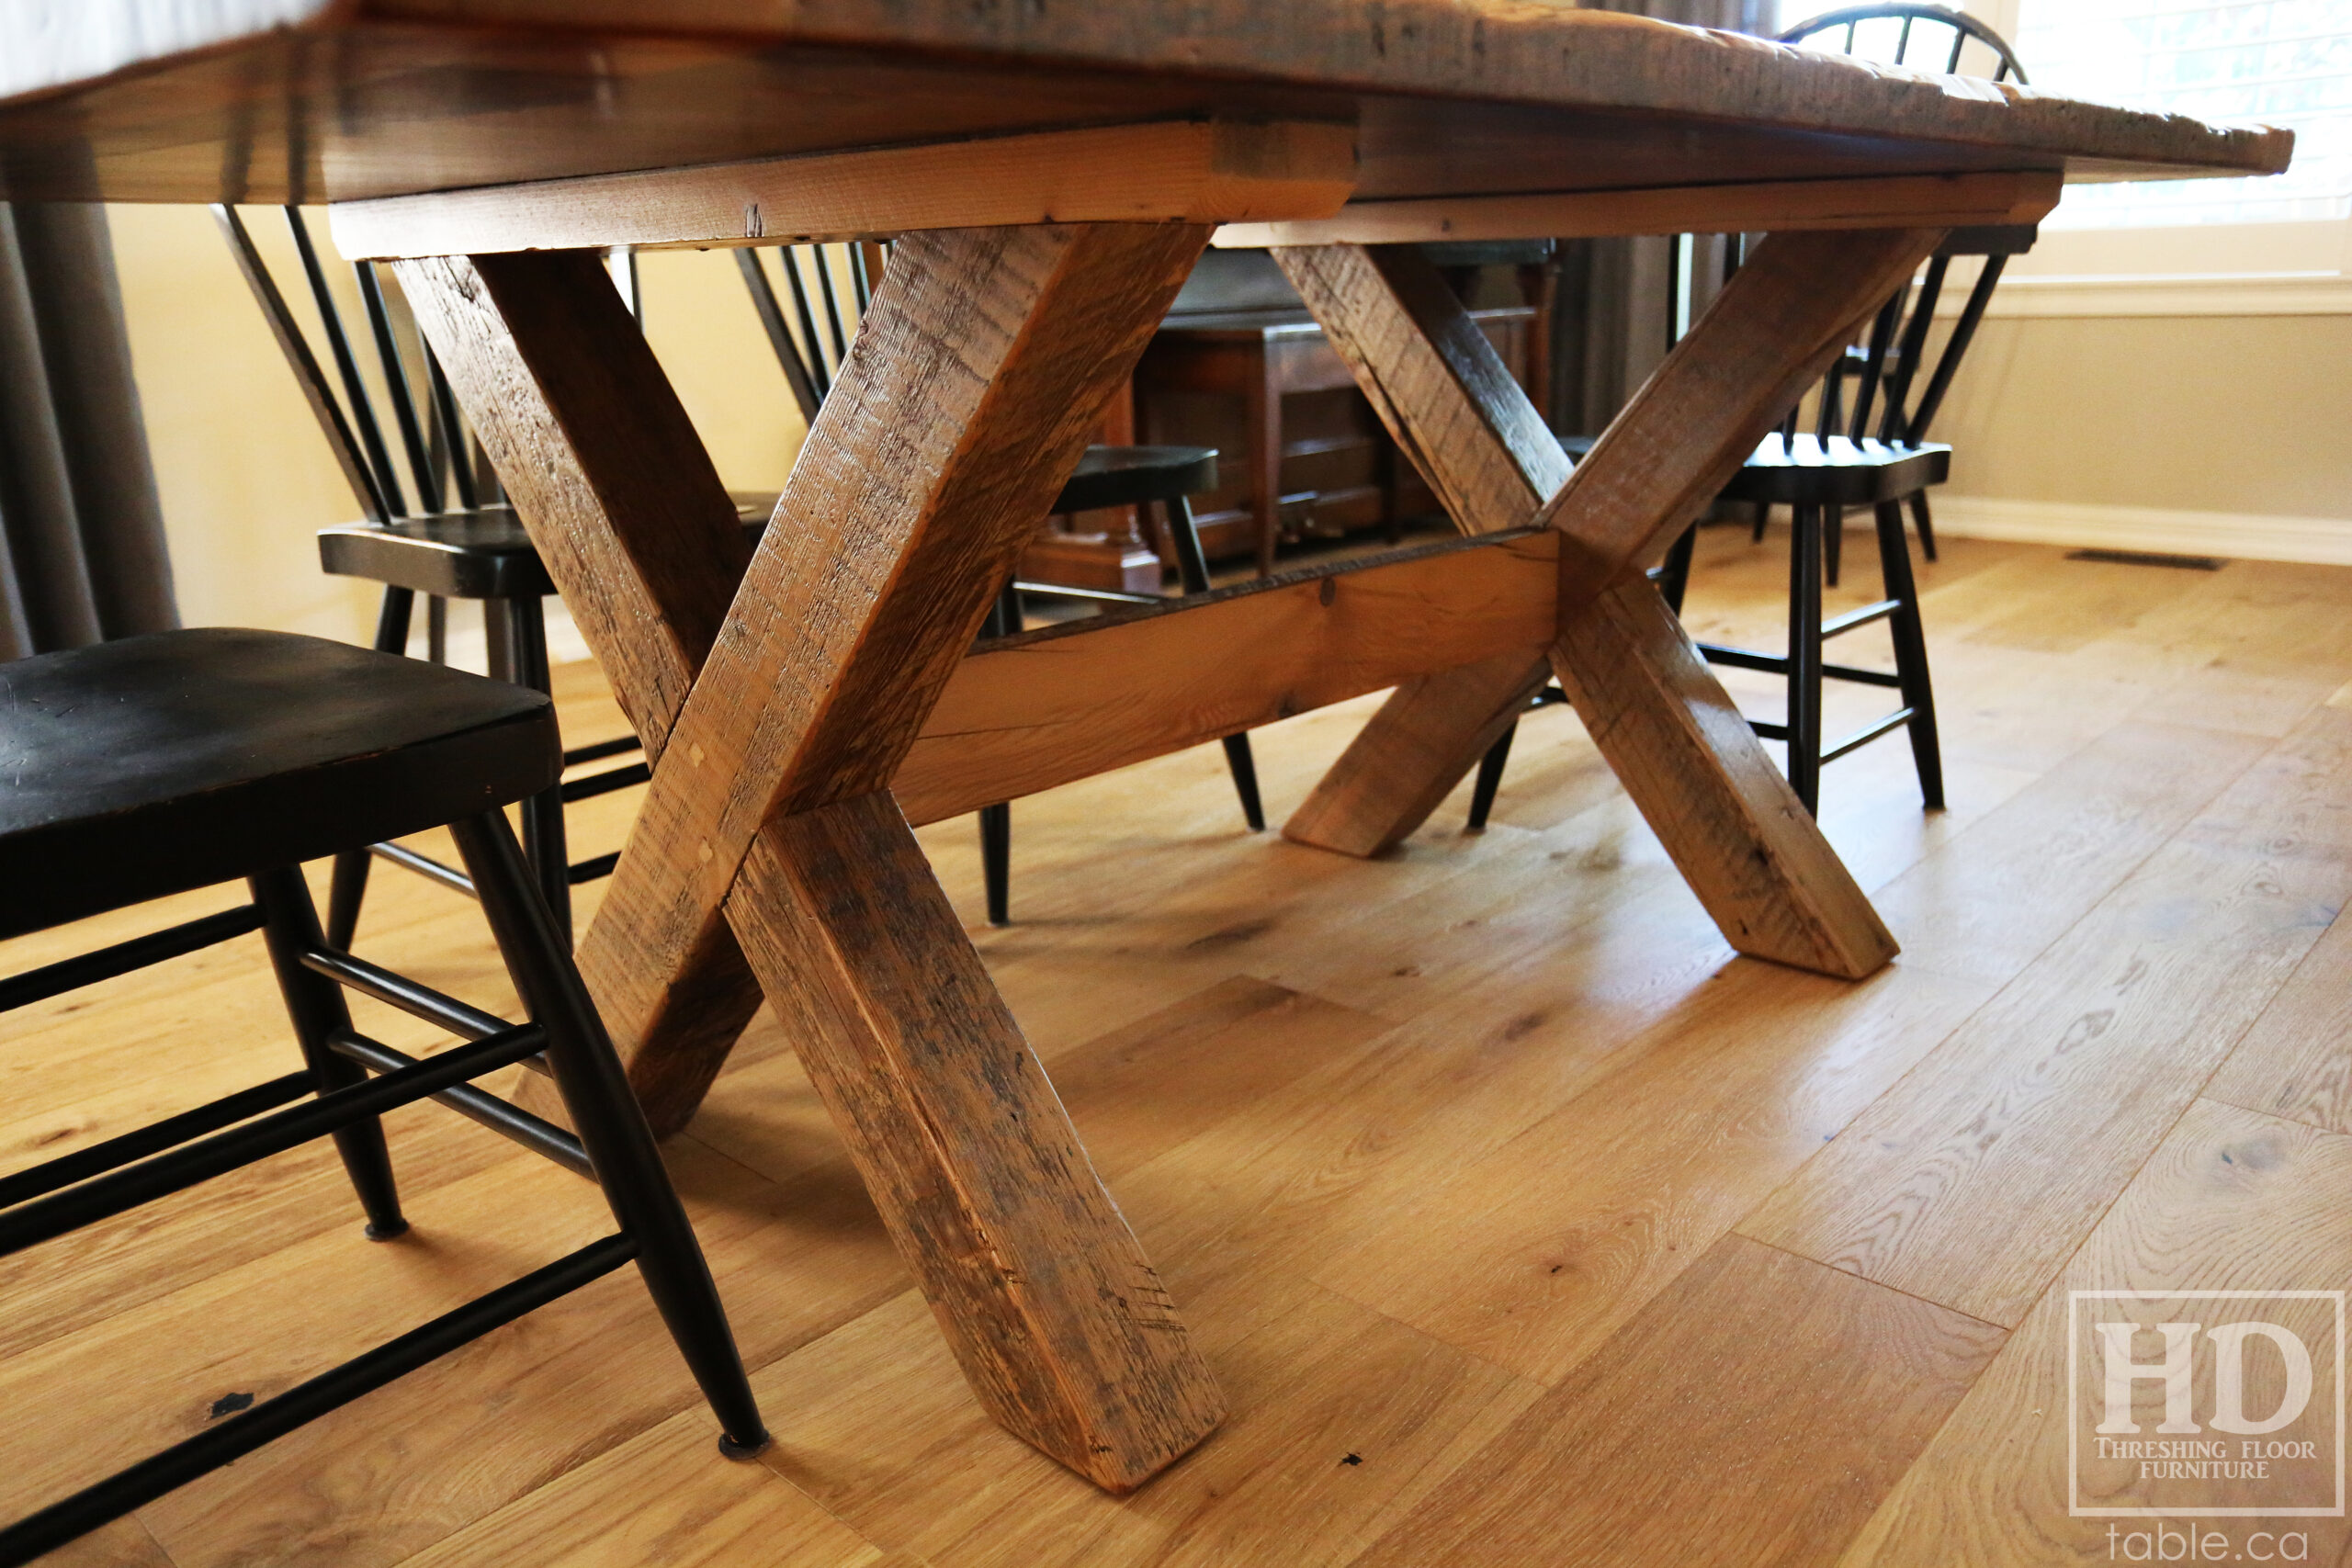 72” Reclaimed Ontario Barnwood Table we made for a Milton, Ontario home - 40” wide – Windbrace Beam Sawbuck X Base - Reclaimed Pine Threshing Floor Construction – Original edges & distressing maintained - Premium epoxy + Matte Option polyurethane finish – Greytone Treatment Option – One 18” Leaf Extension - www.table.ca